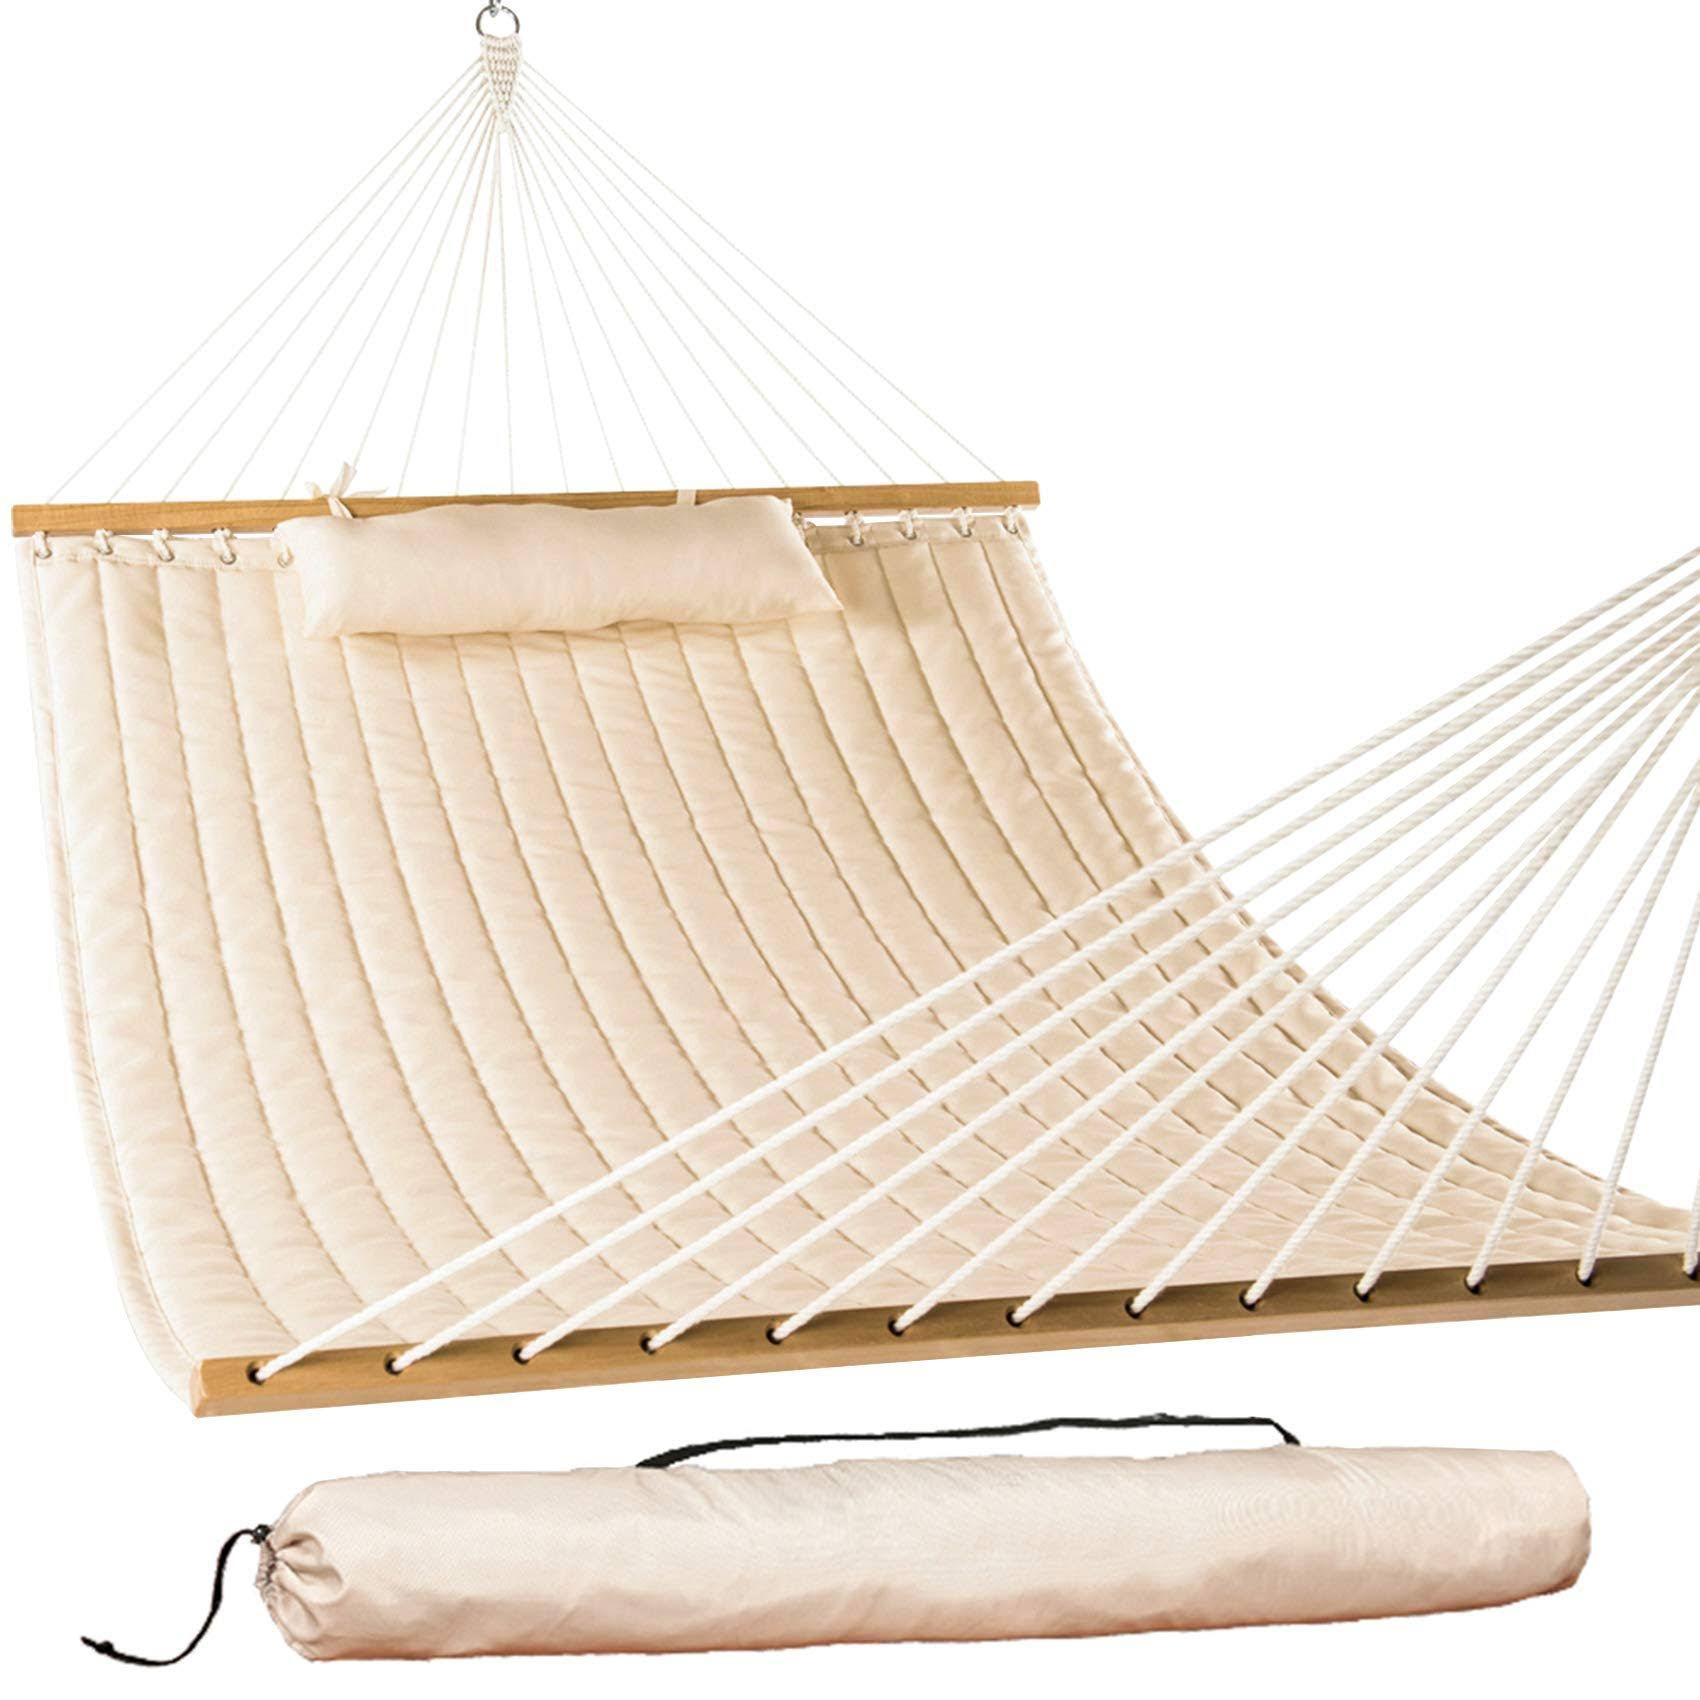 Lazy Daze Classic Hammocks Double Quilted Fabric Swing with Pillow,Spreader Bar Camping Hammock, 55 Inches Beige